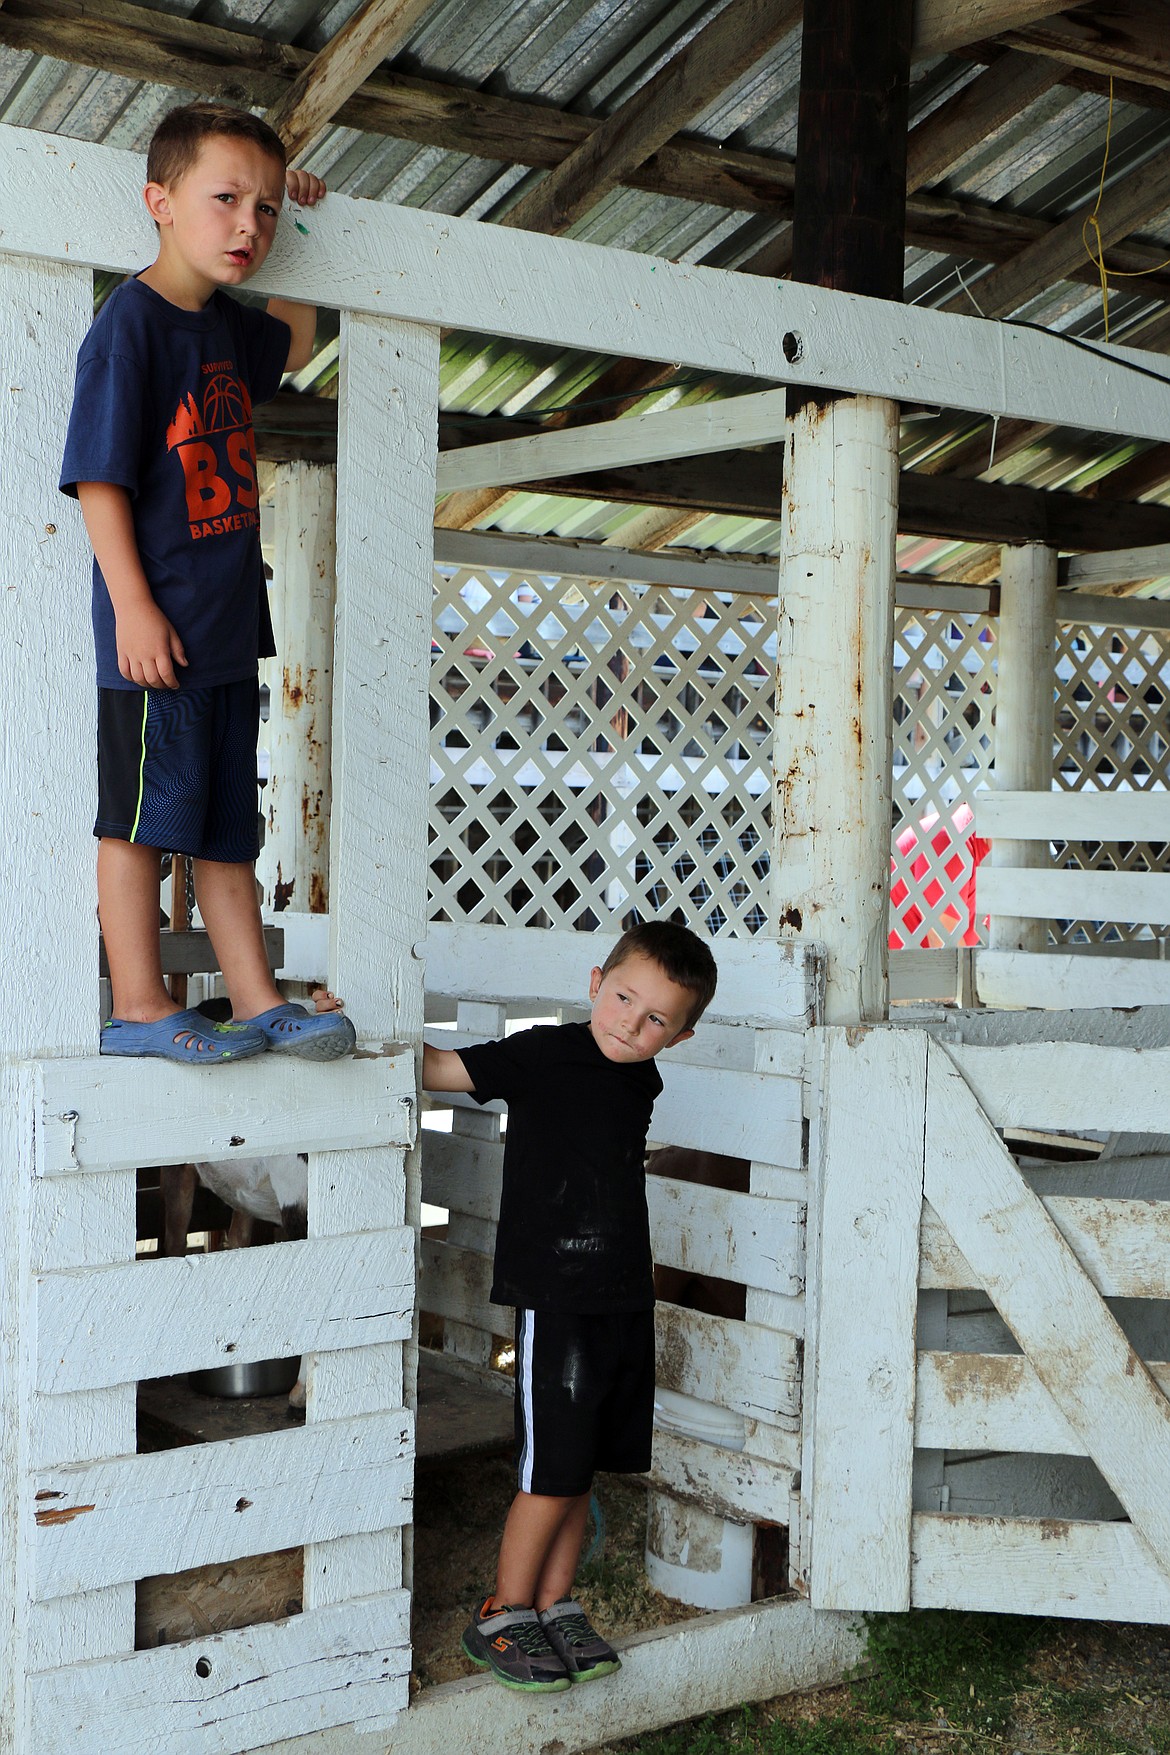 Chase and Pryce Ducken hang out at the Bonner County Fair last week.